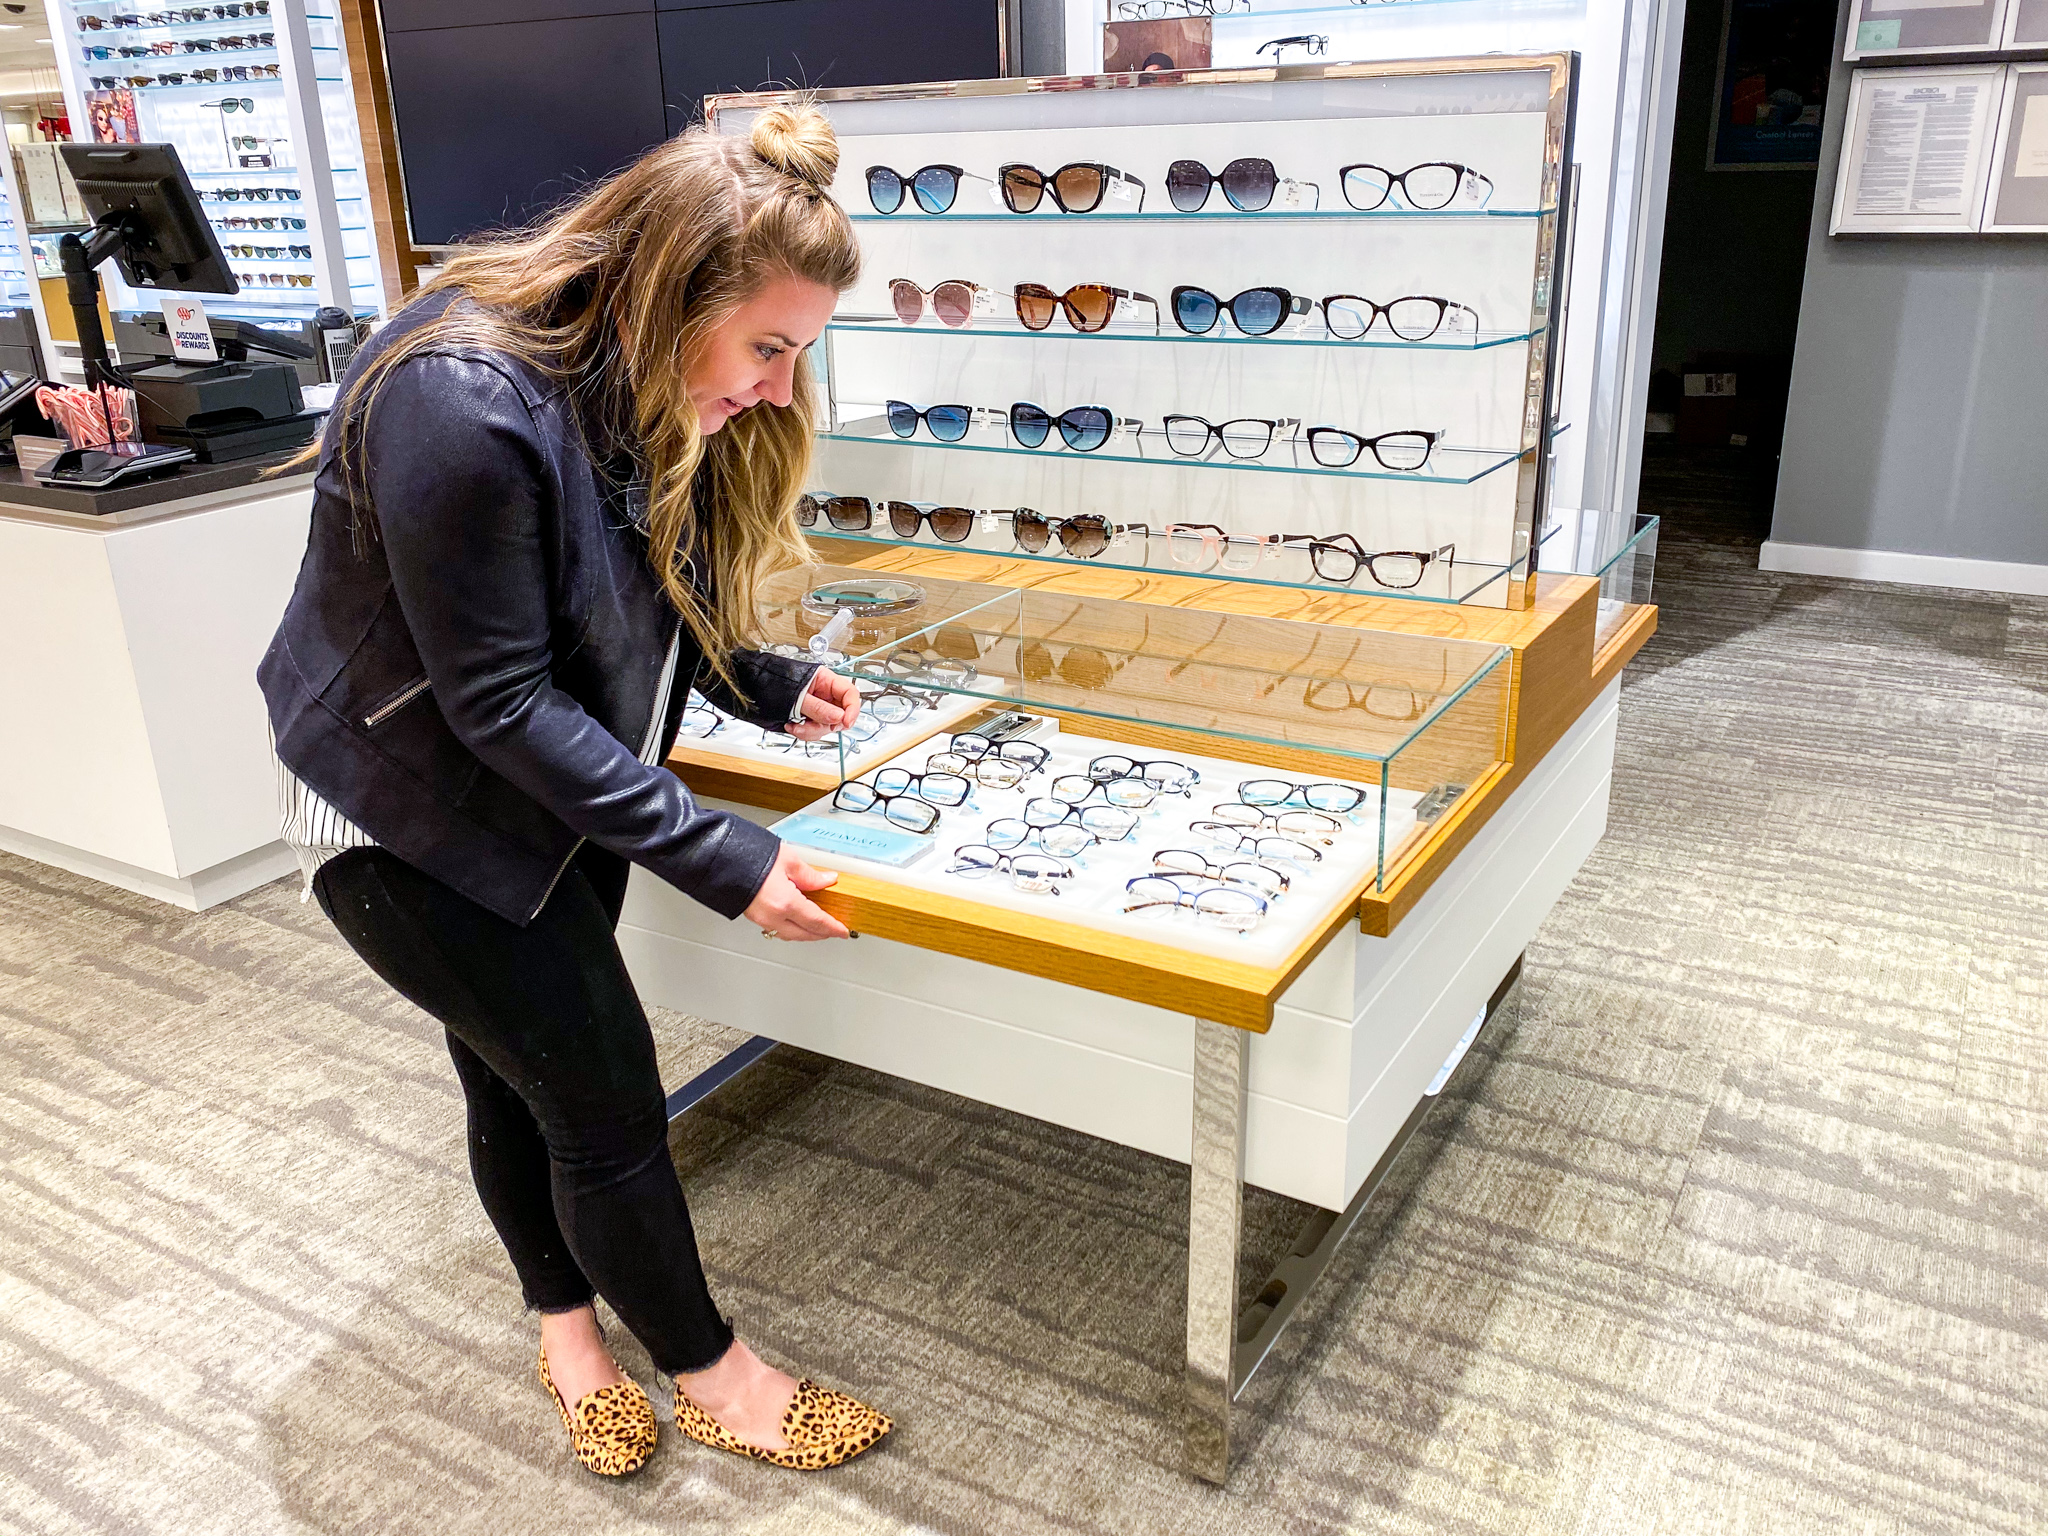 Lenscrafters at Macys | life and style | Coffee Beans and Bobby Pins